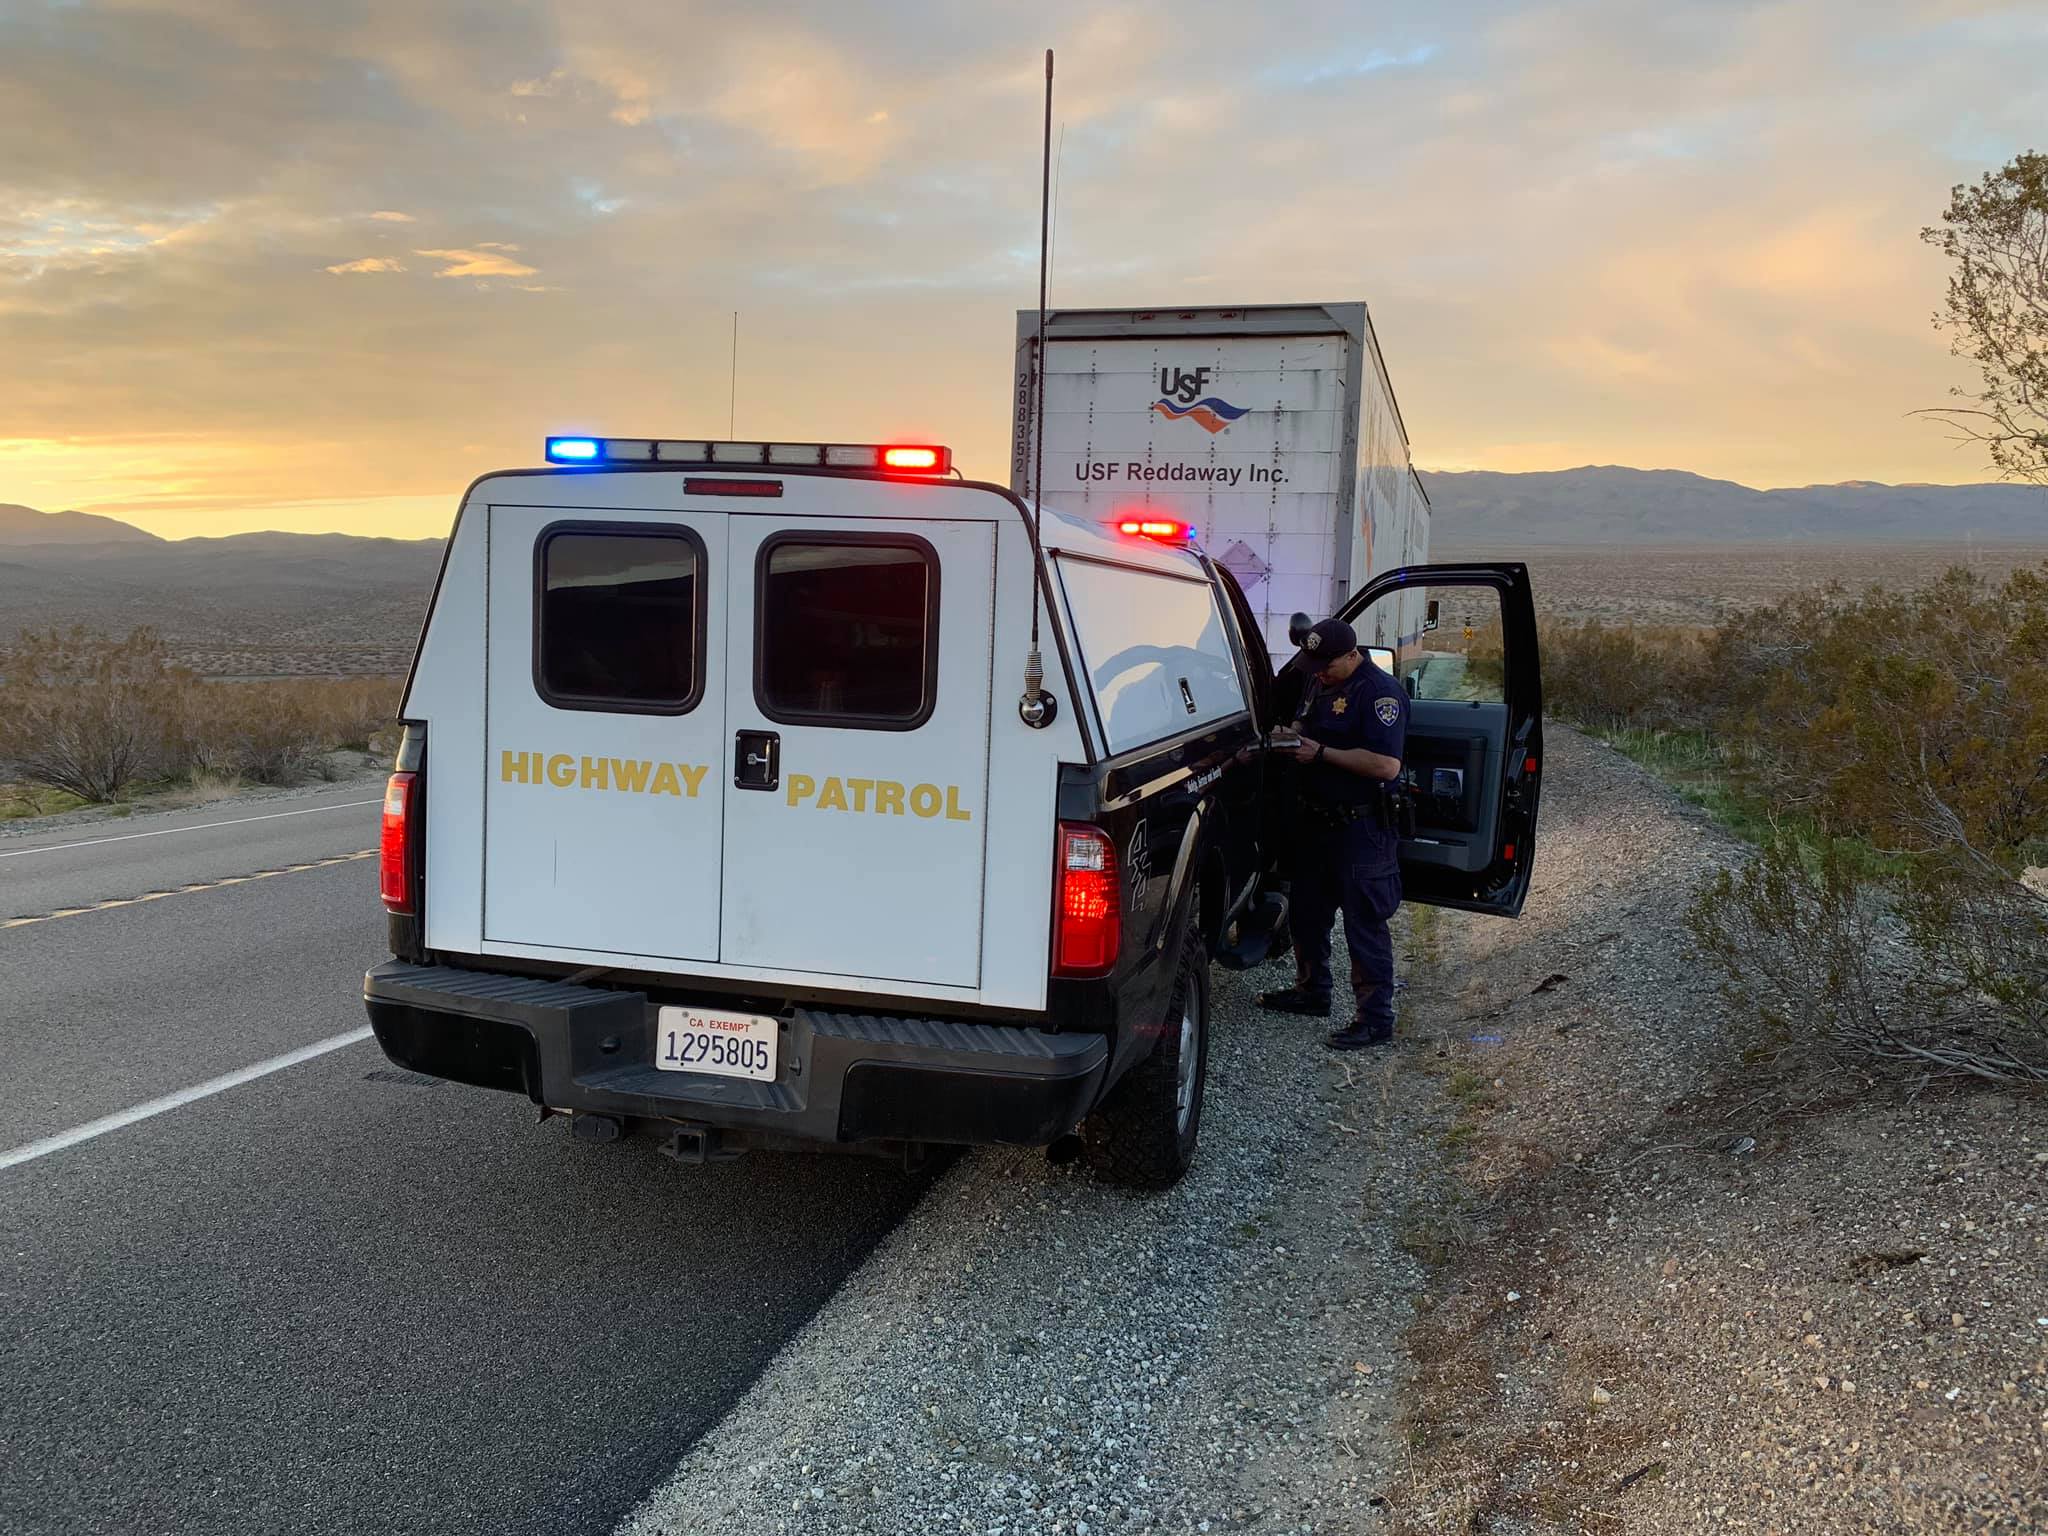 Over 100 cited during CHP's Highway 395 enforcement operation.com Valley News Group